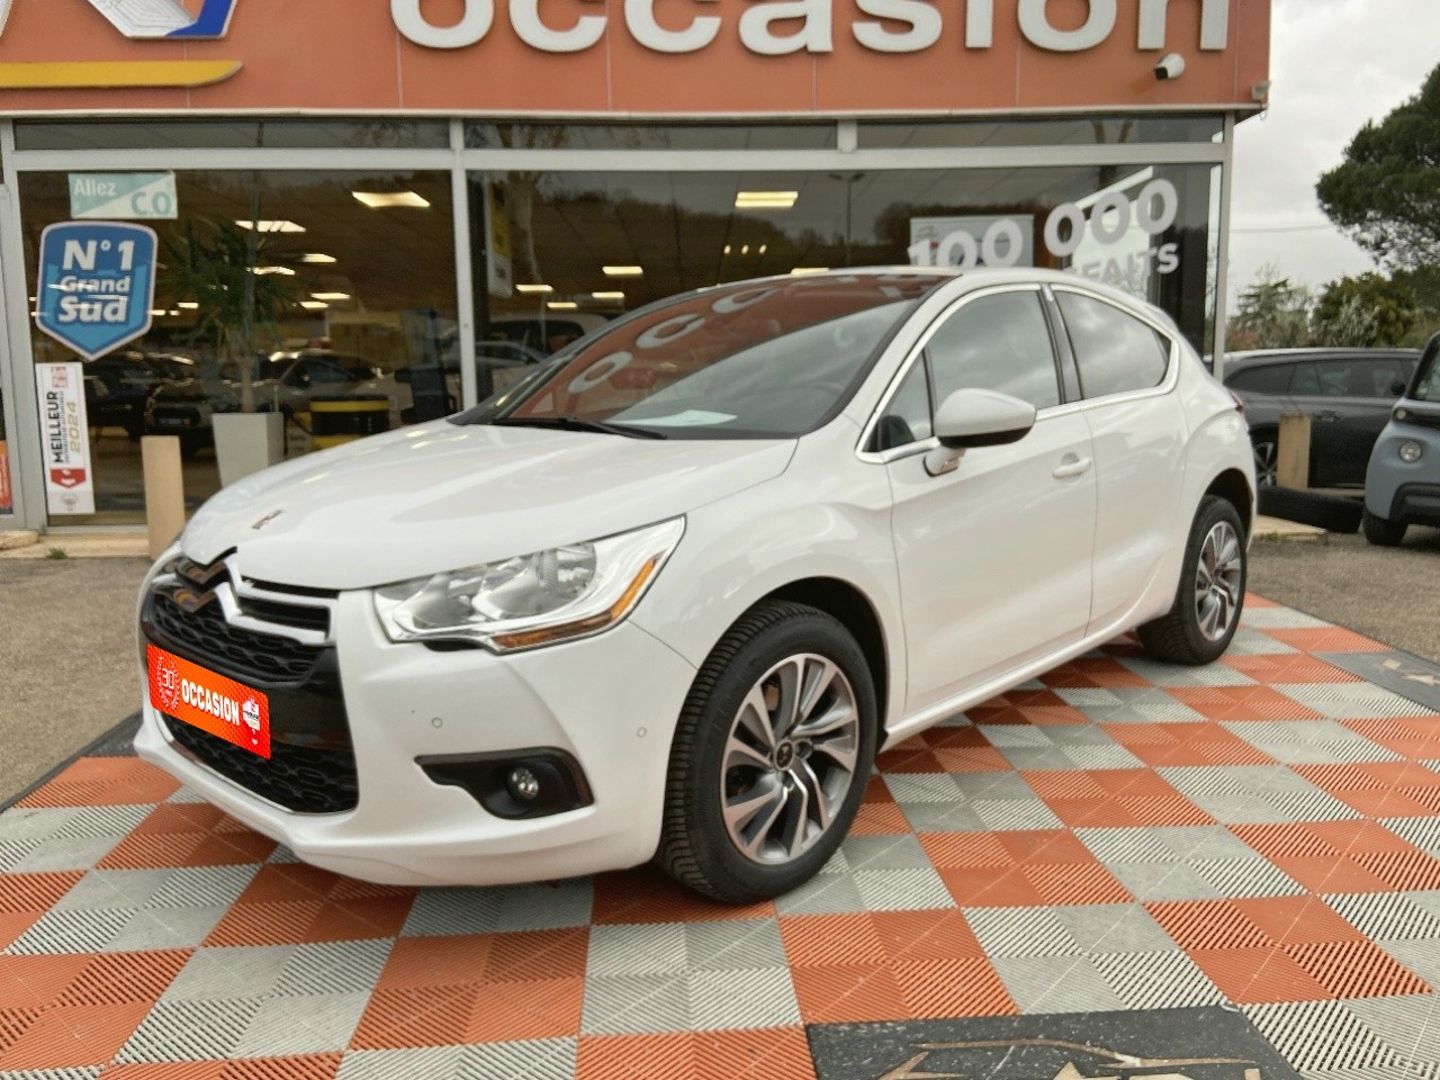 DS DS4 2.0 HDI 150 BV6 EXECUTIVE